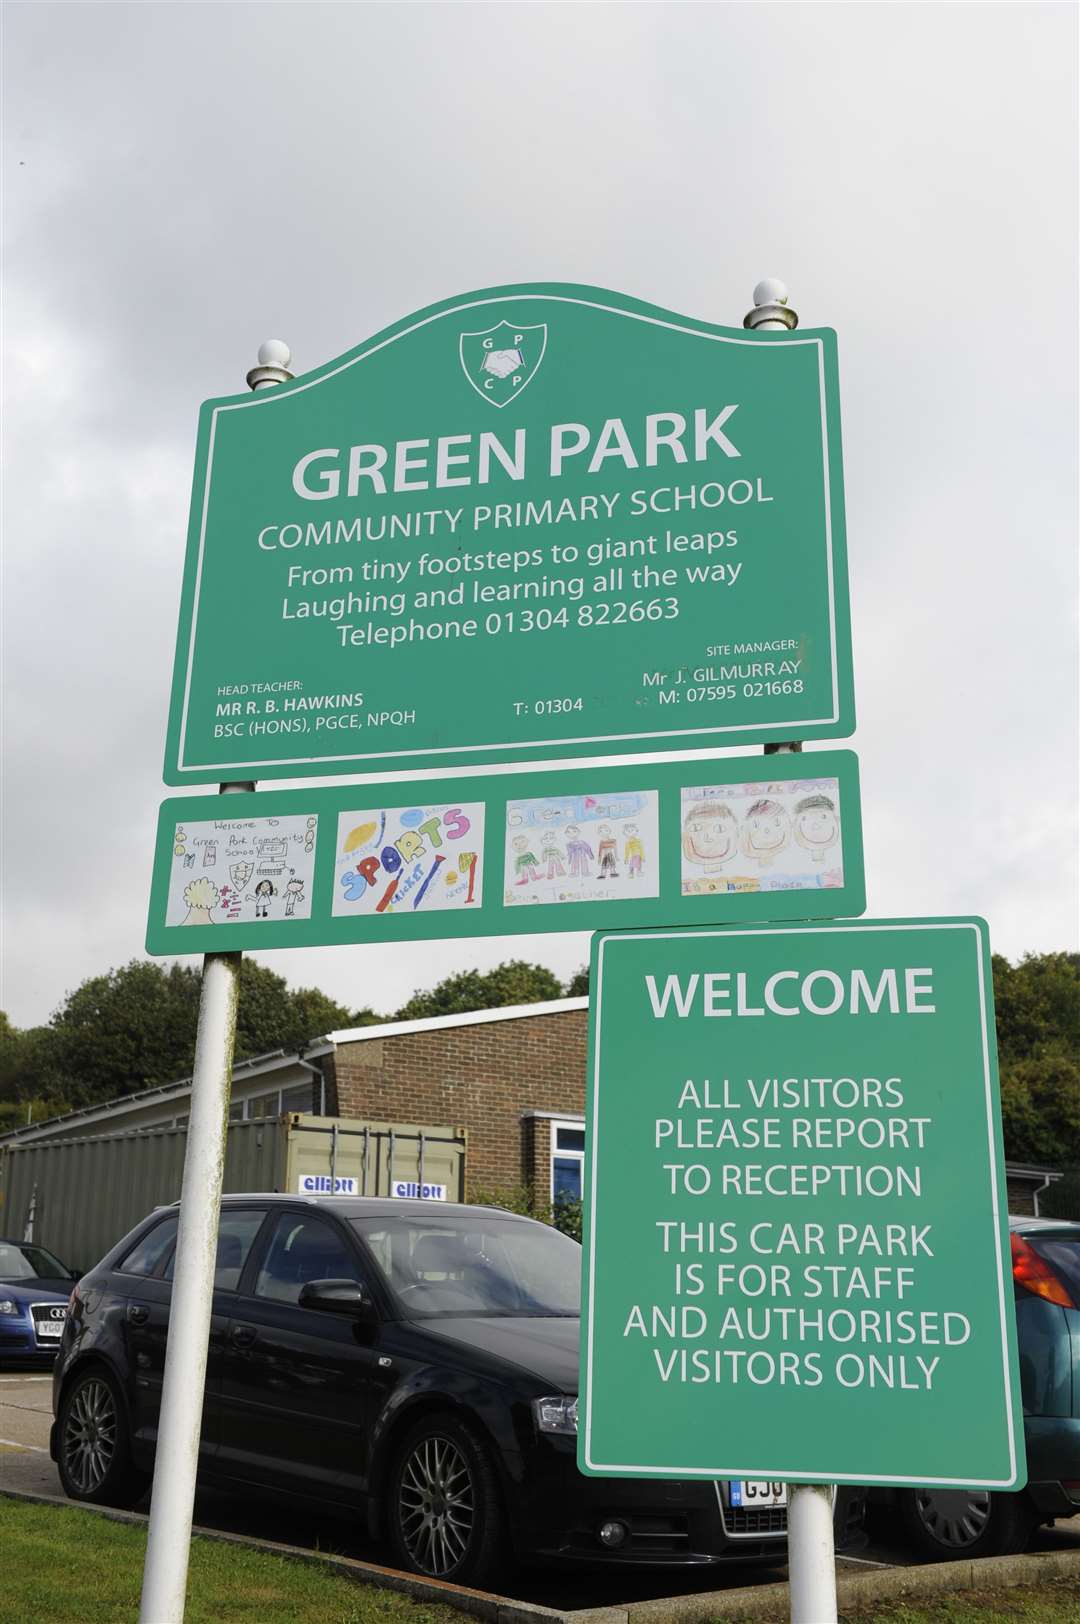 Green Park Community Primary School, The Linces, Buckland, Dover.